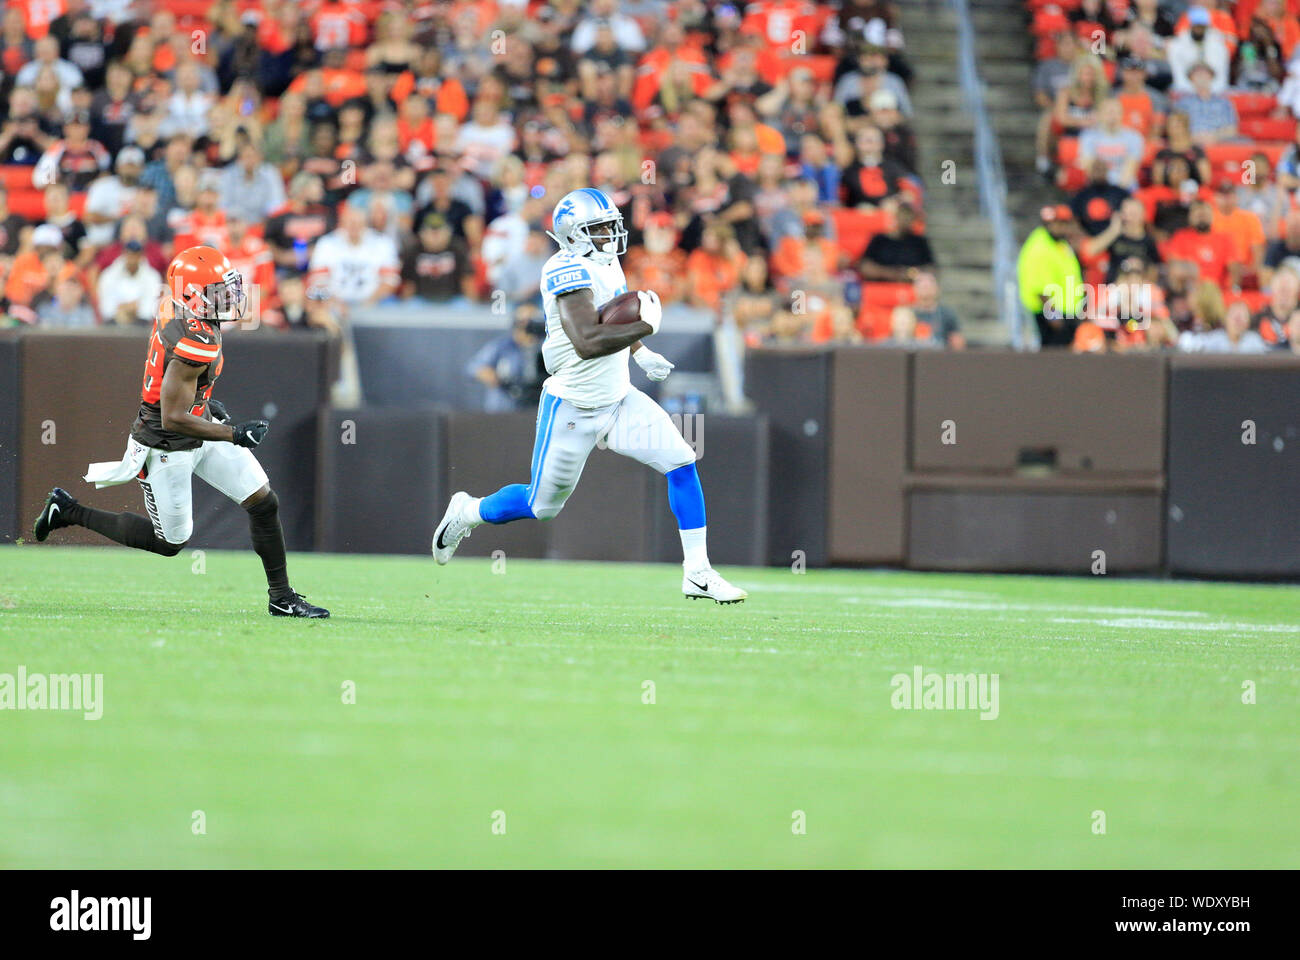 Cleveland, Ohio, USA. 29th Aug, 2019. August 29, 2019: DUPLICATE***Detroit Lions running back Mark Thompson (49) running the ball at the NFL Preseason Week 4 football game between the Detroit Lions and the Cleveland Browns at First Energy Stadium in Cleveland, Ohio. JP Waldron/Cal Sport Media Credit: Cal Sport Media/Alamy Live News Stock Photo